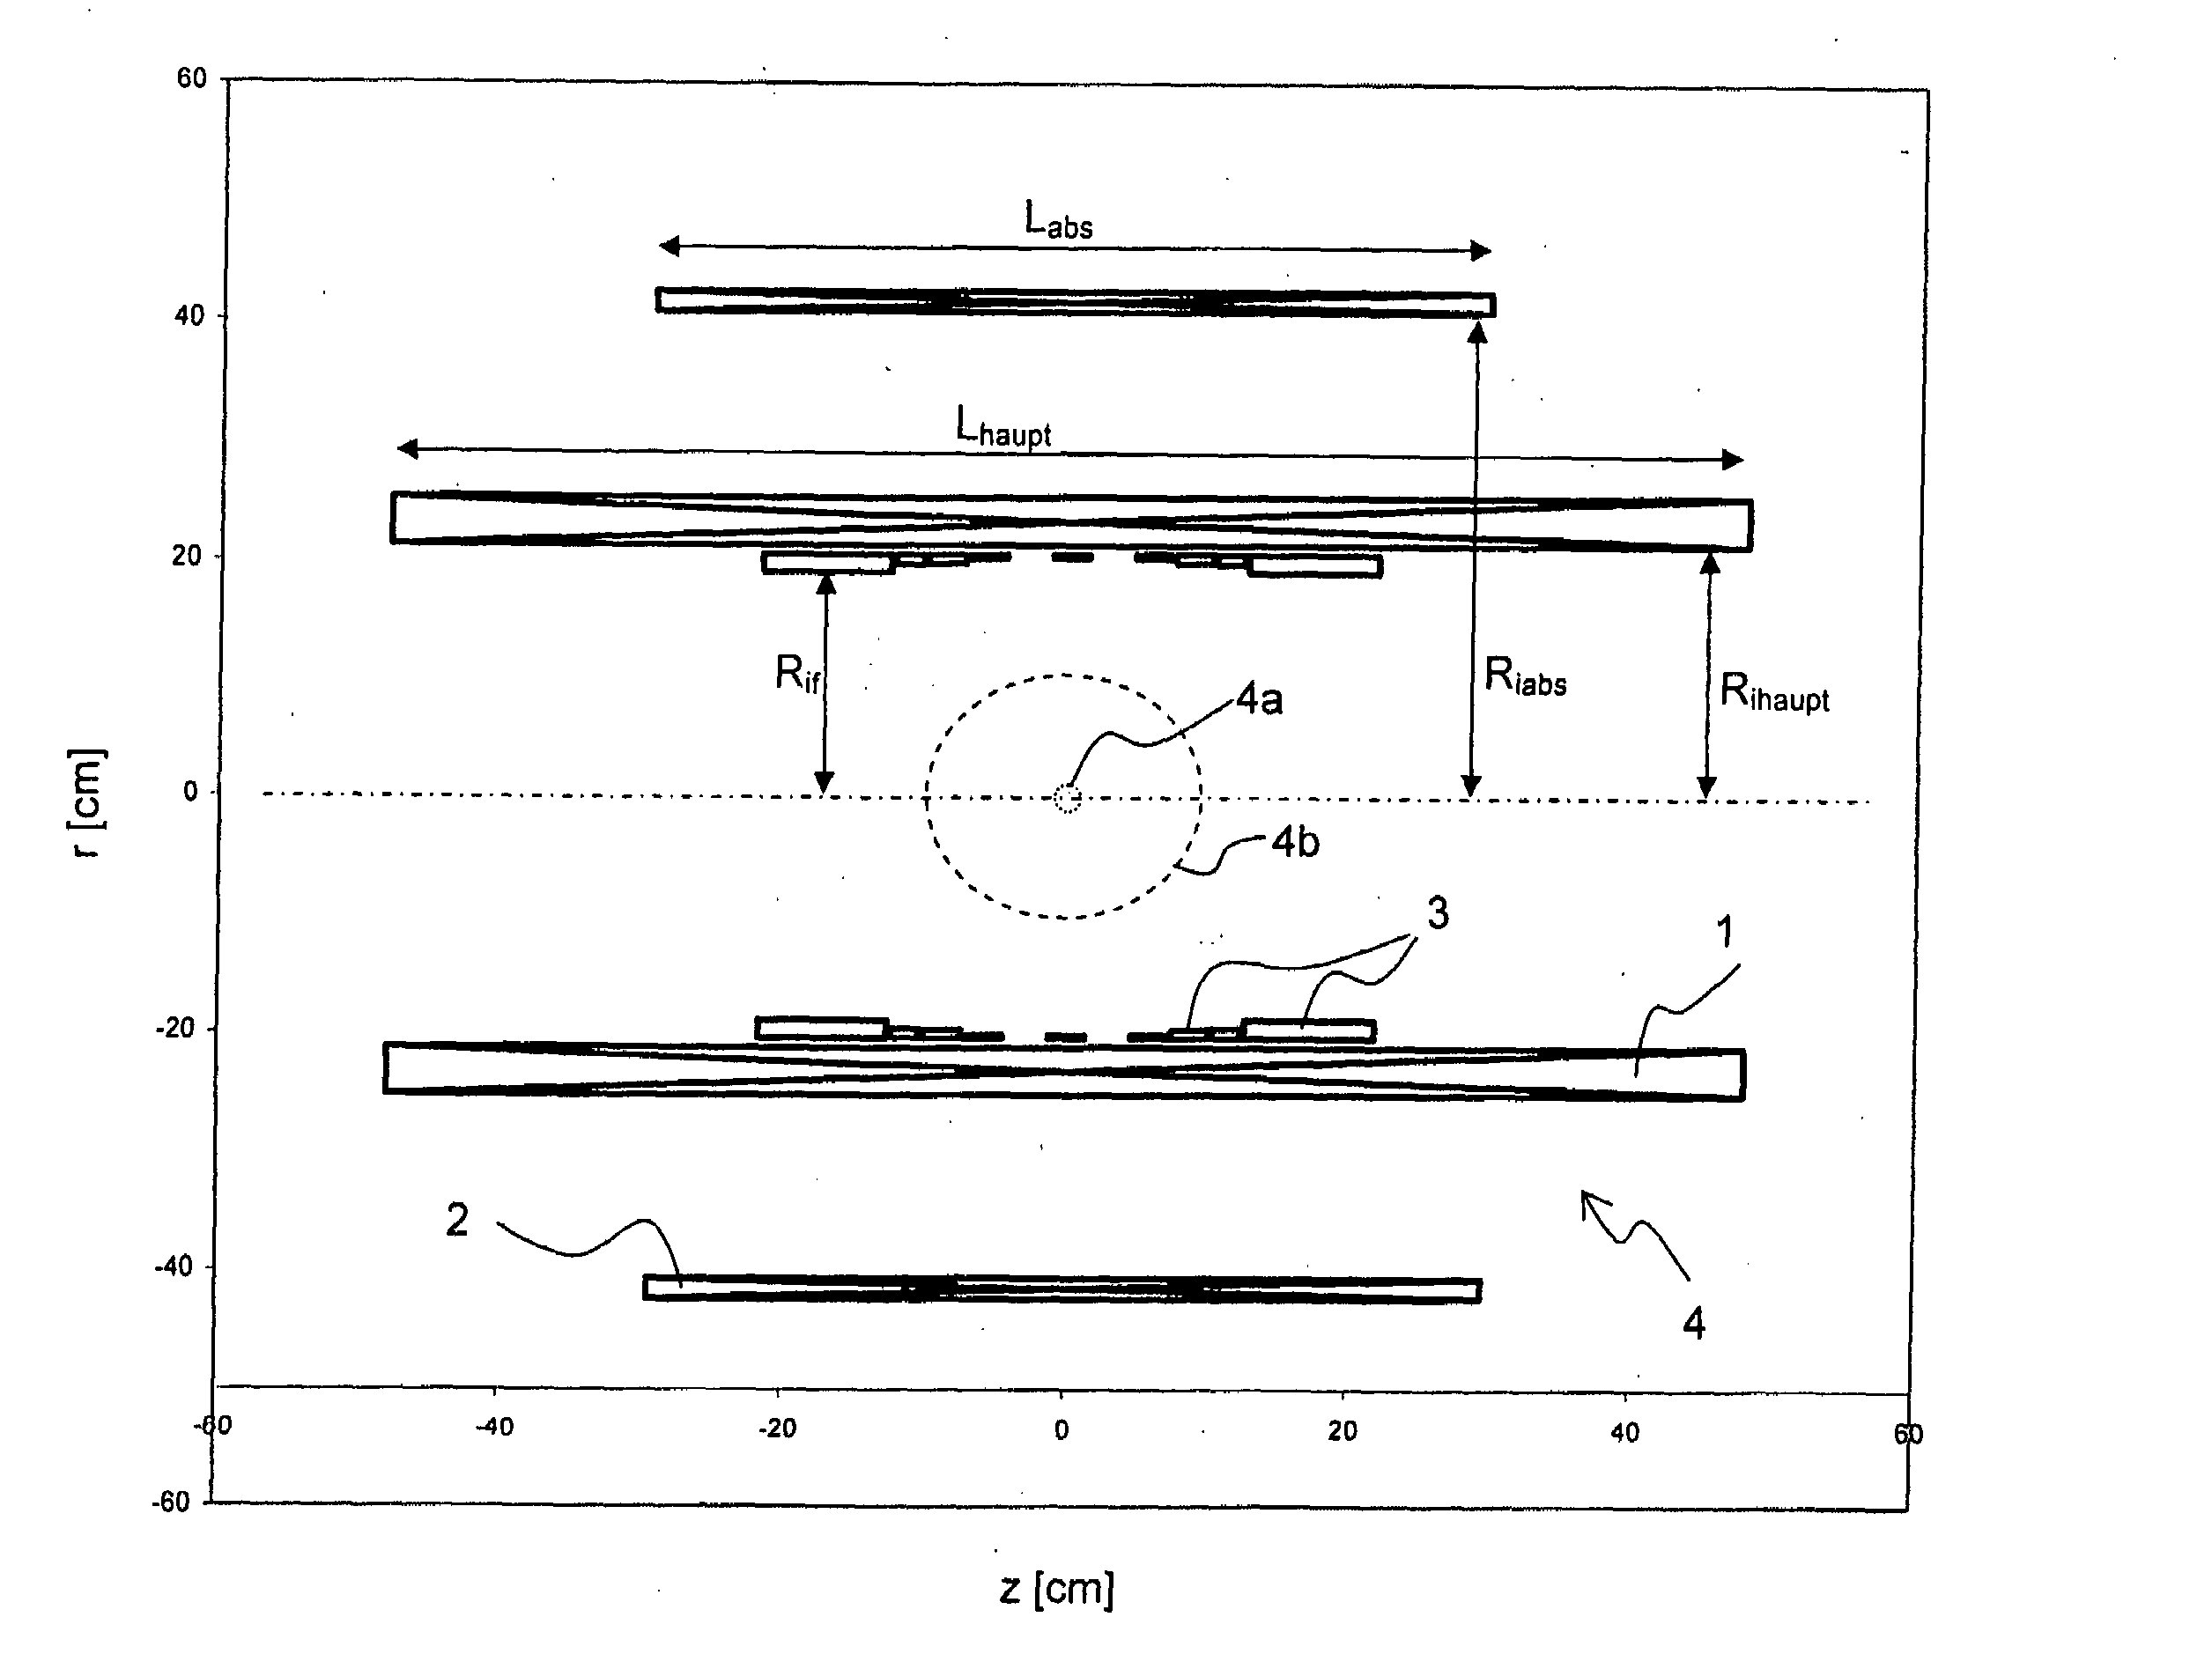 Compact superconducting magnet configuration with active shielding having a shielding coil contributing to field formation